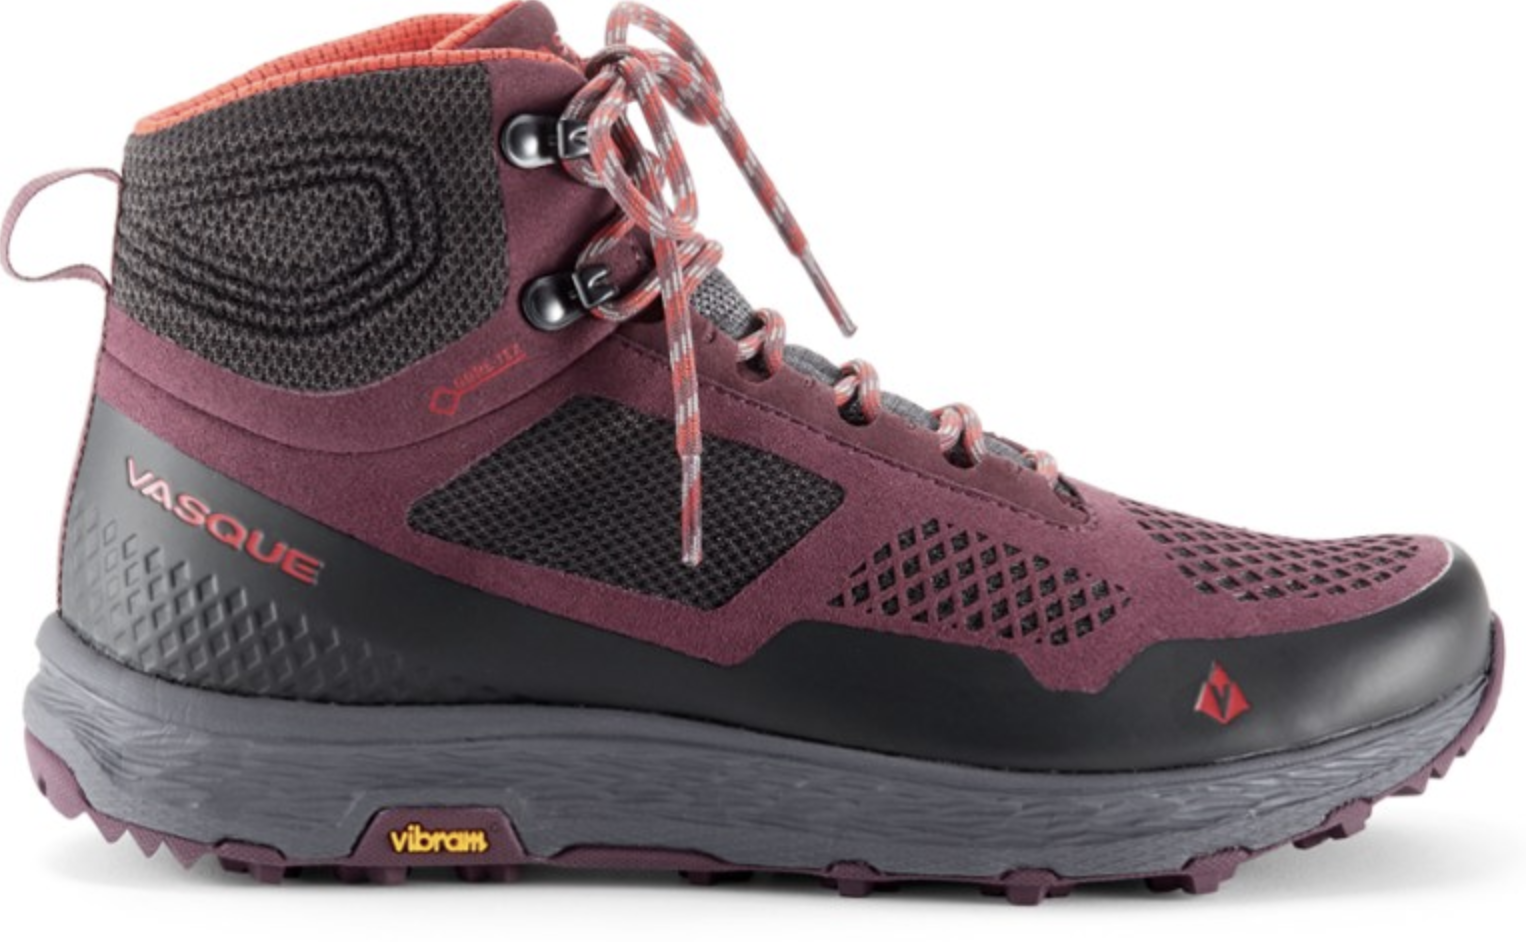 plum and black thick-soled mid-height hiking boots